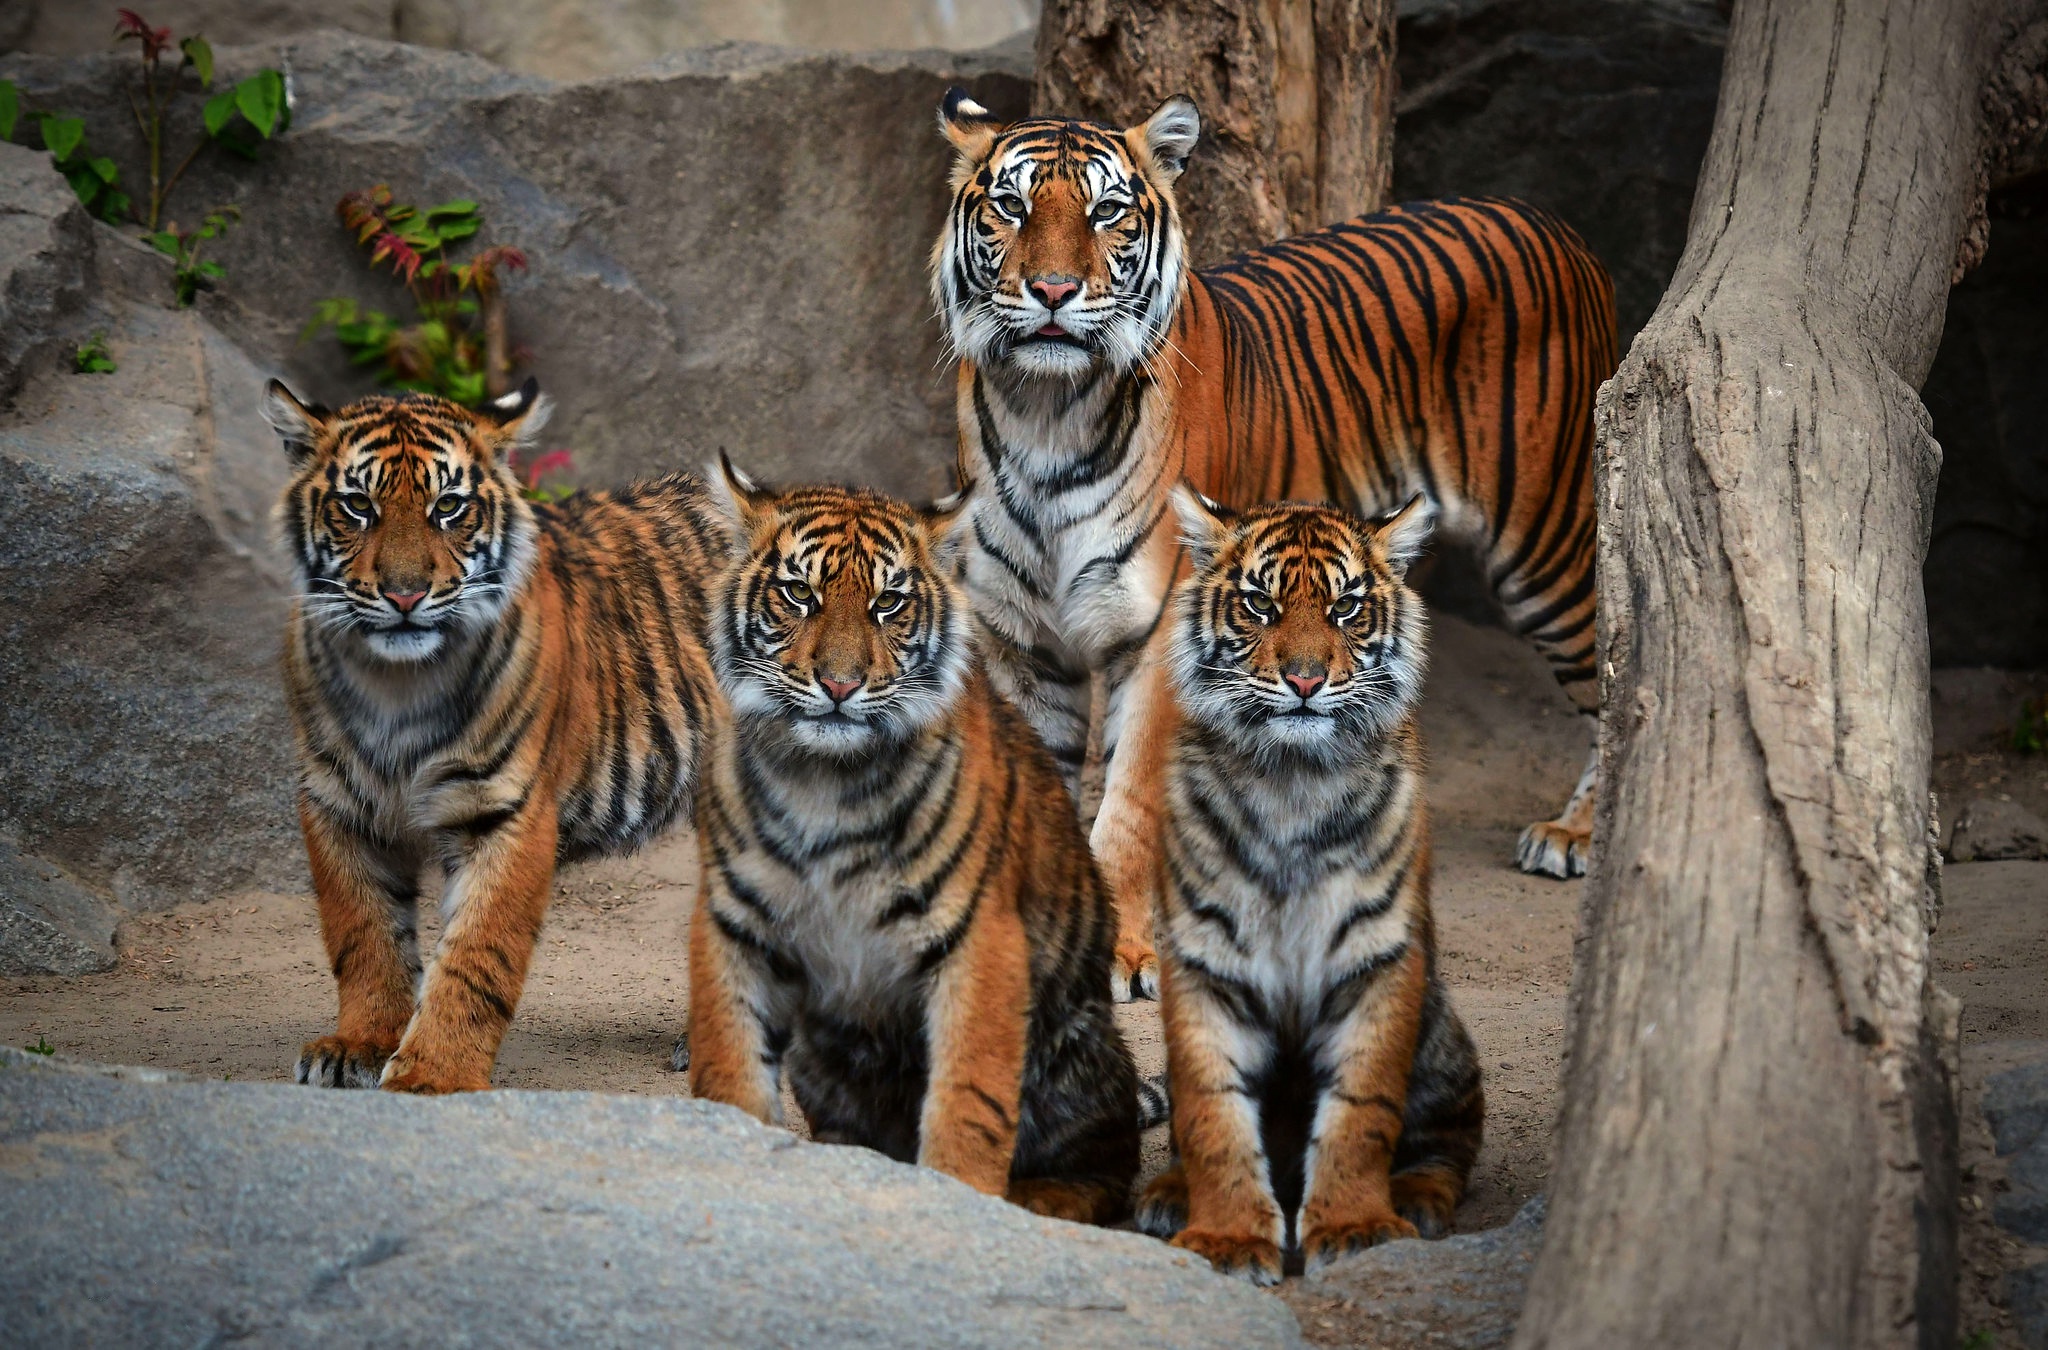 These are the tiger’s closest family members